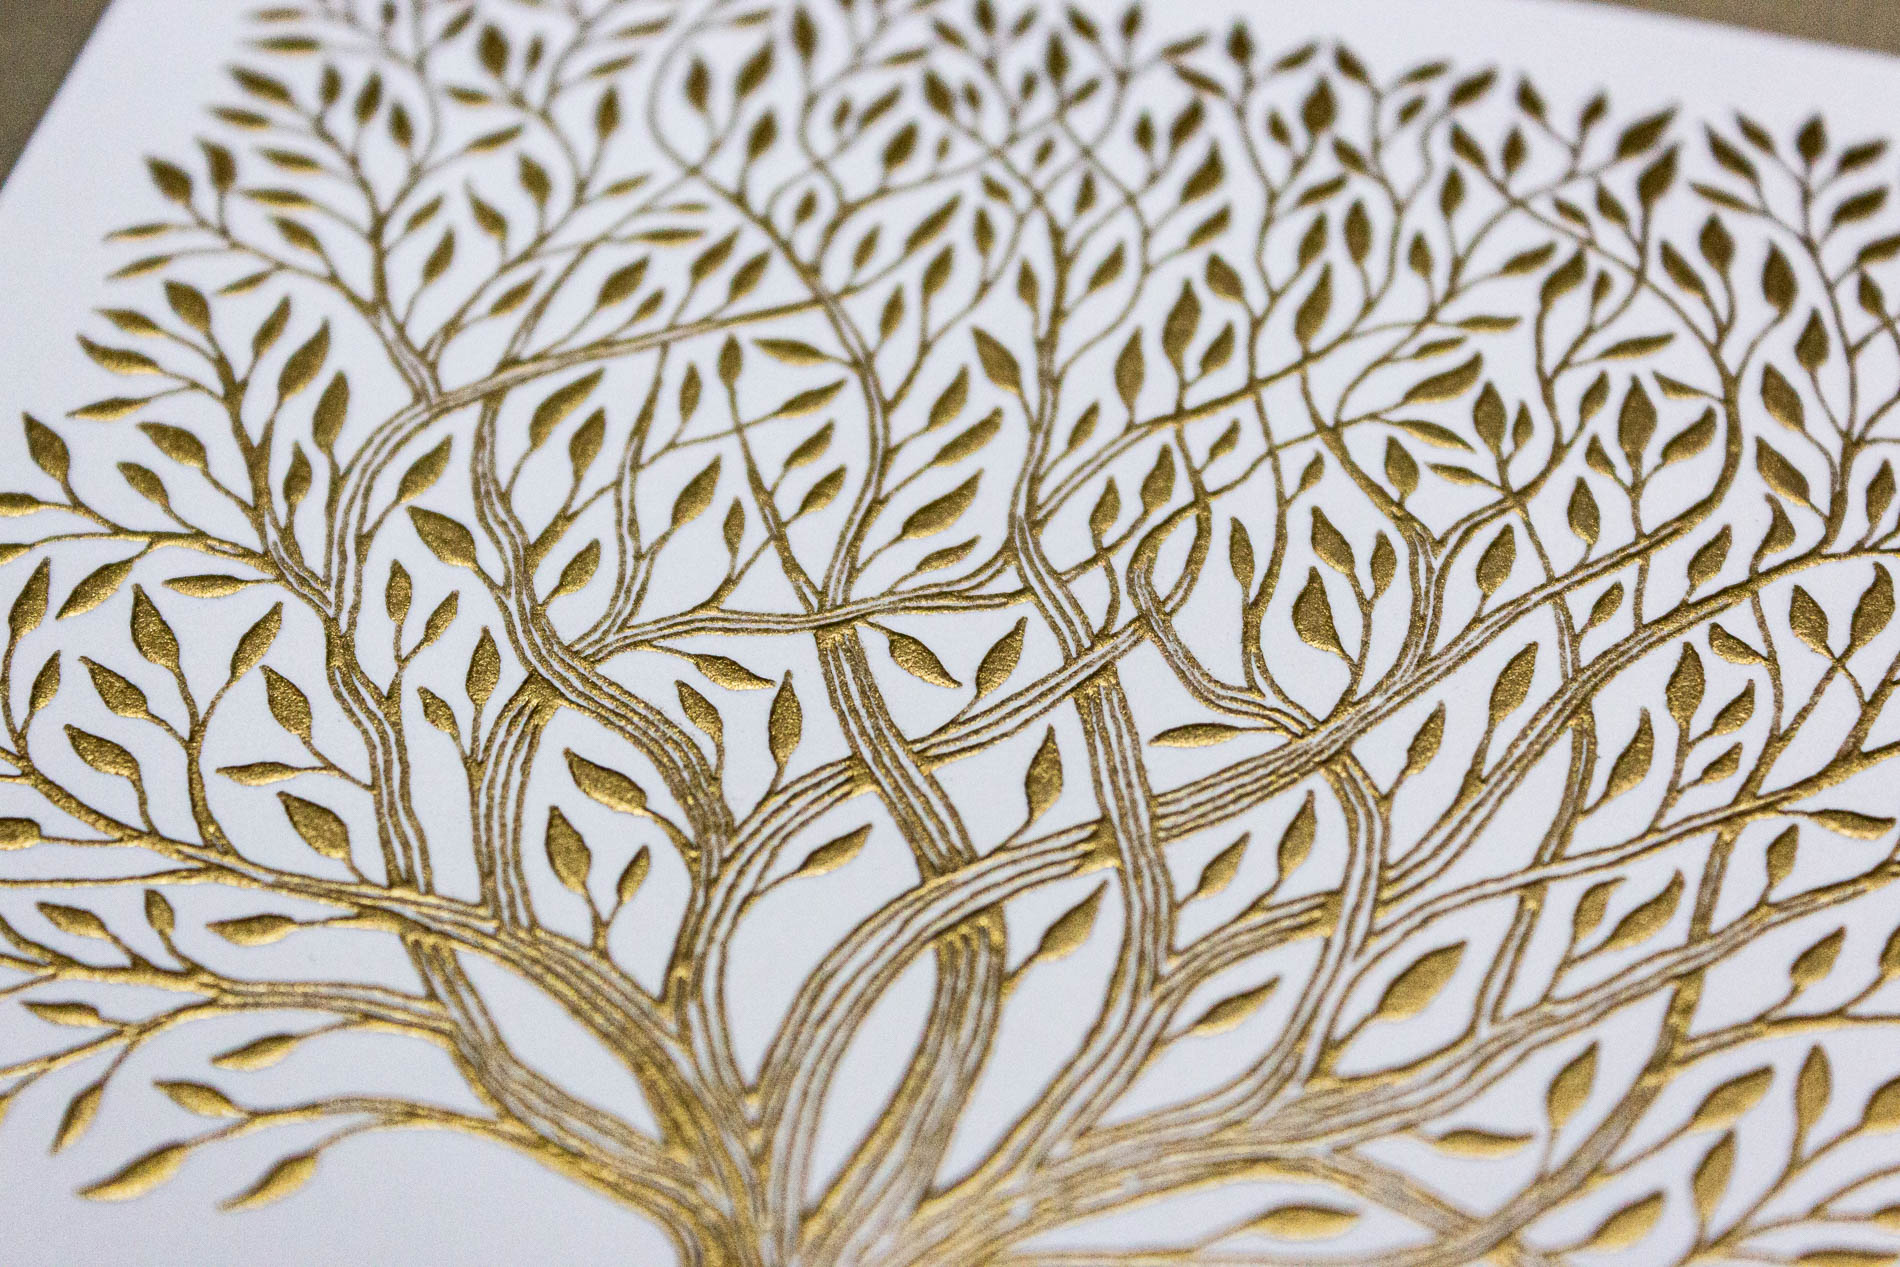 close-up of branches and leaves in Frazier's intricate illustration